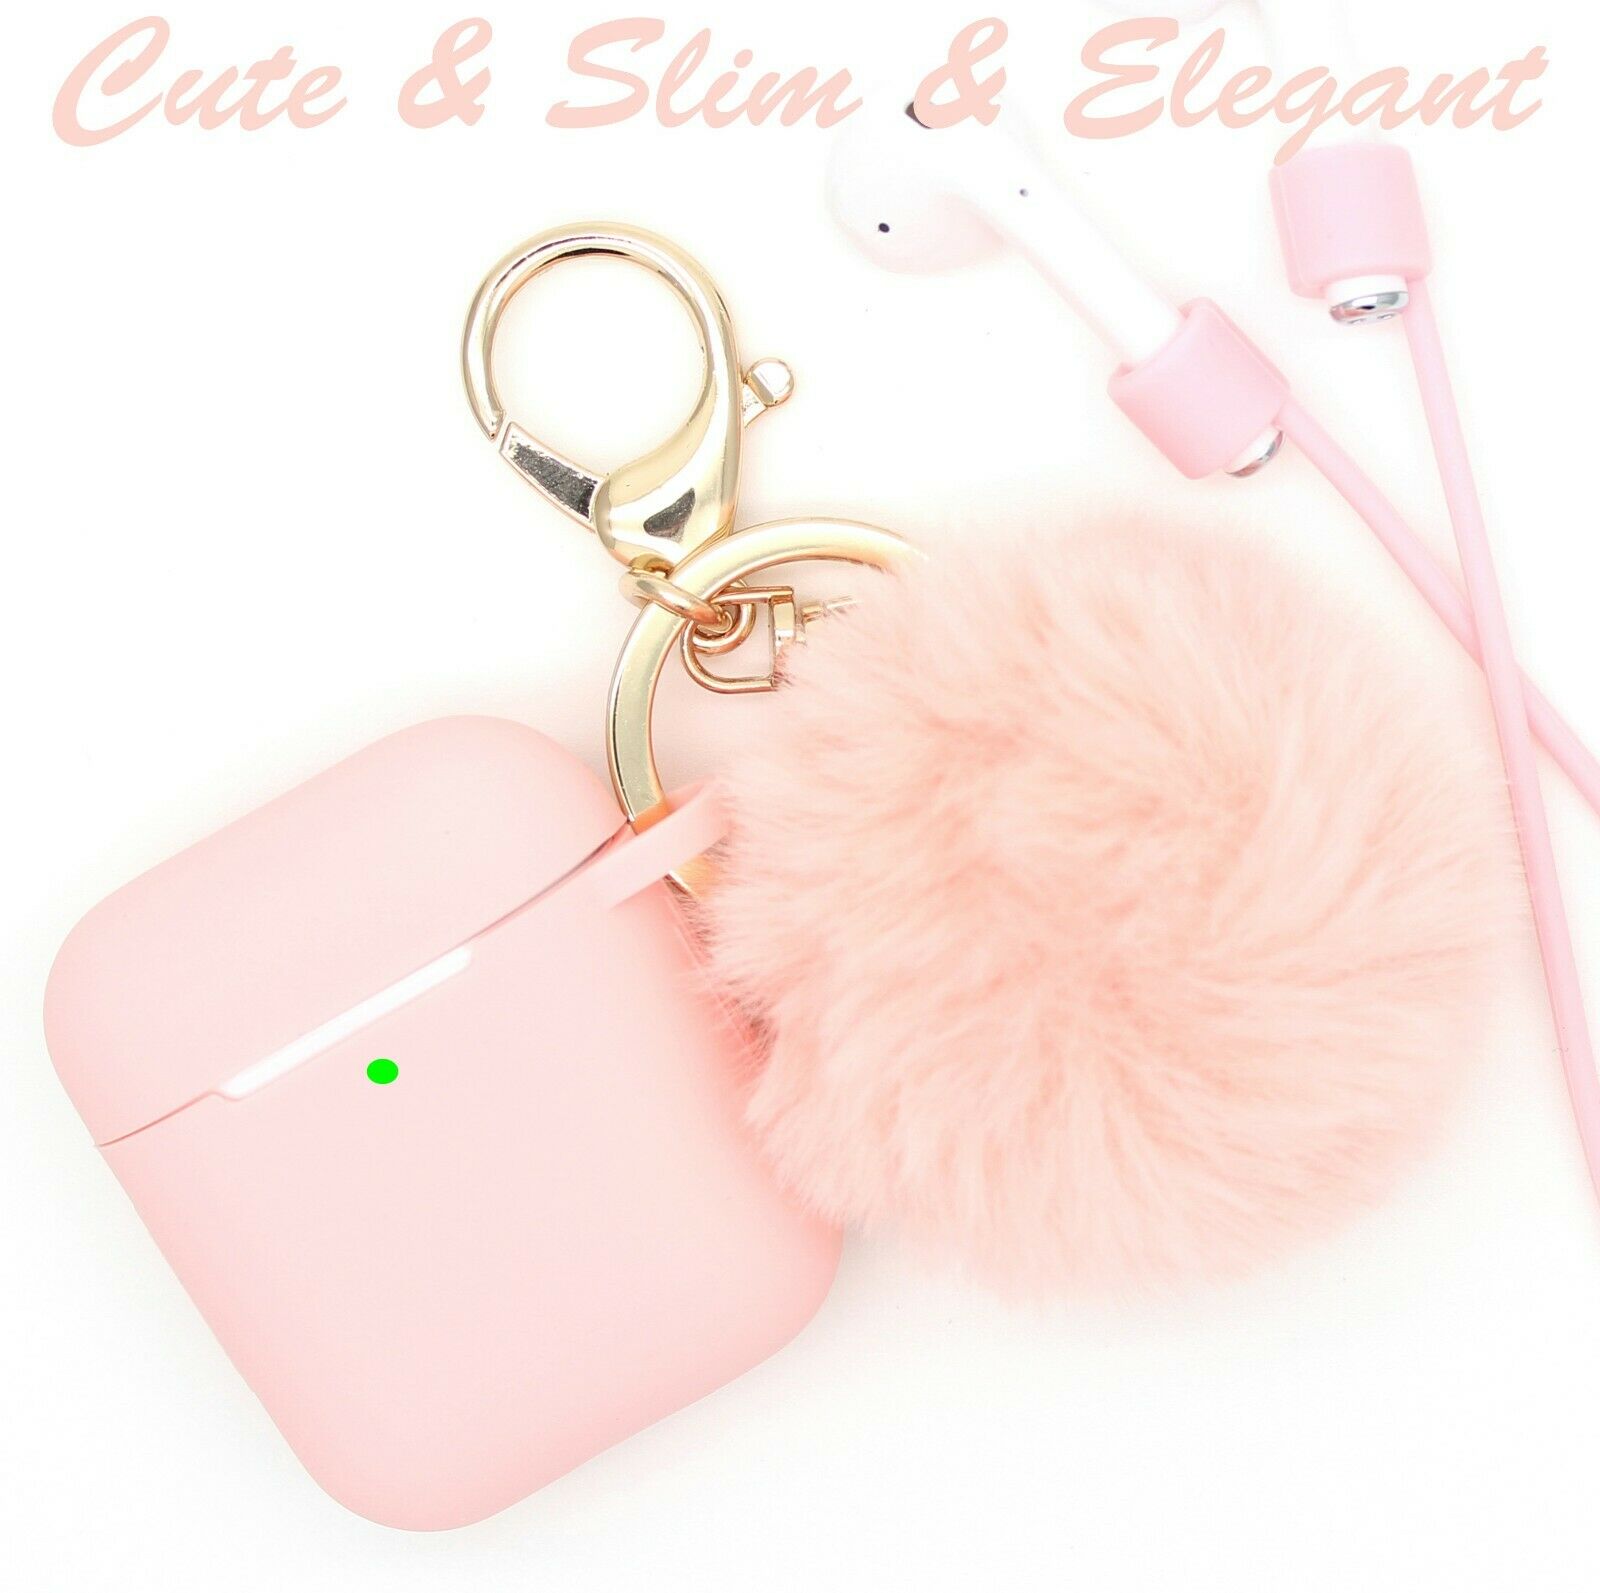 Cute Airpods Silicone Case Cover w/Fur Ball Keychain Strap for Apple Airpods 1/2 ervin.accessories 